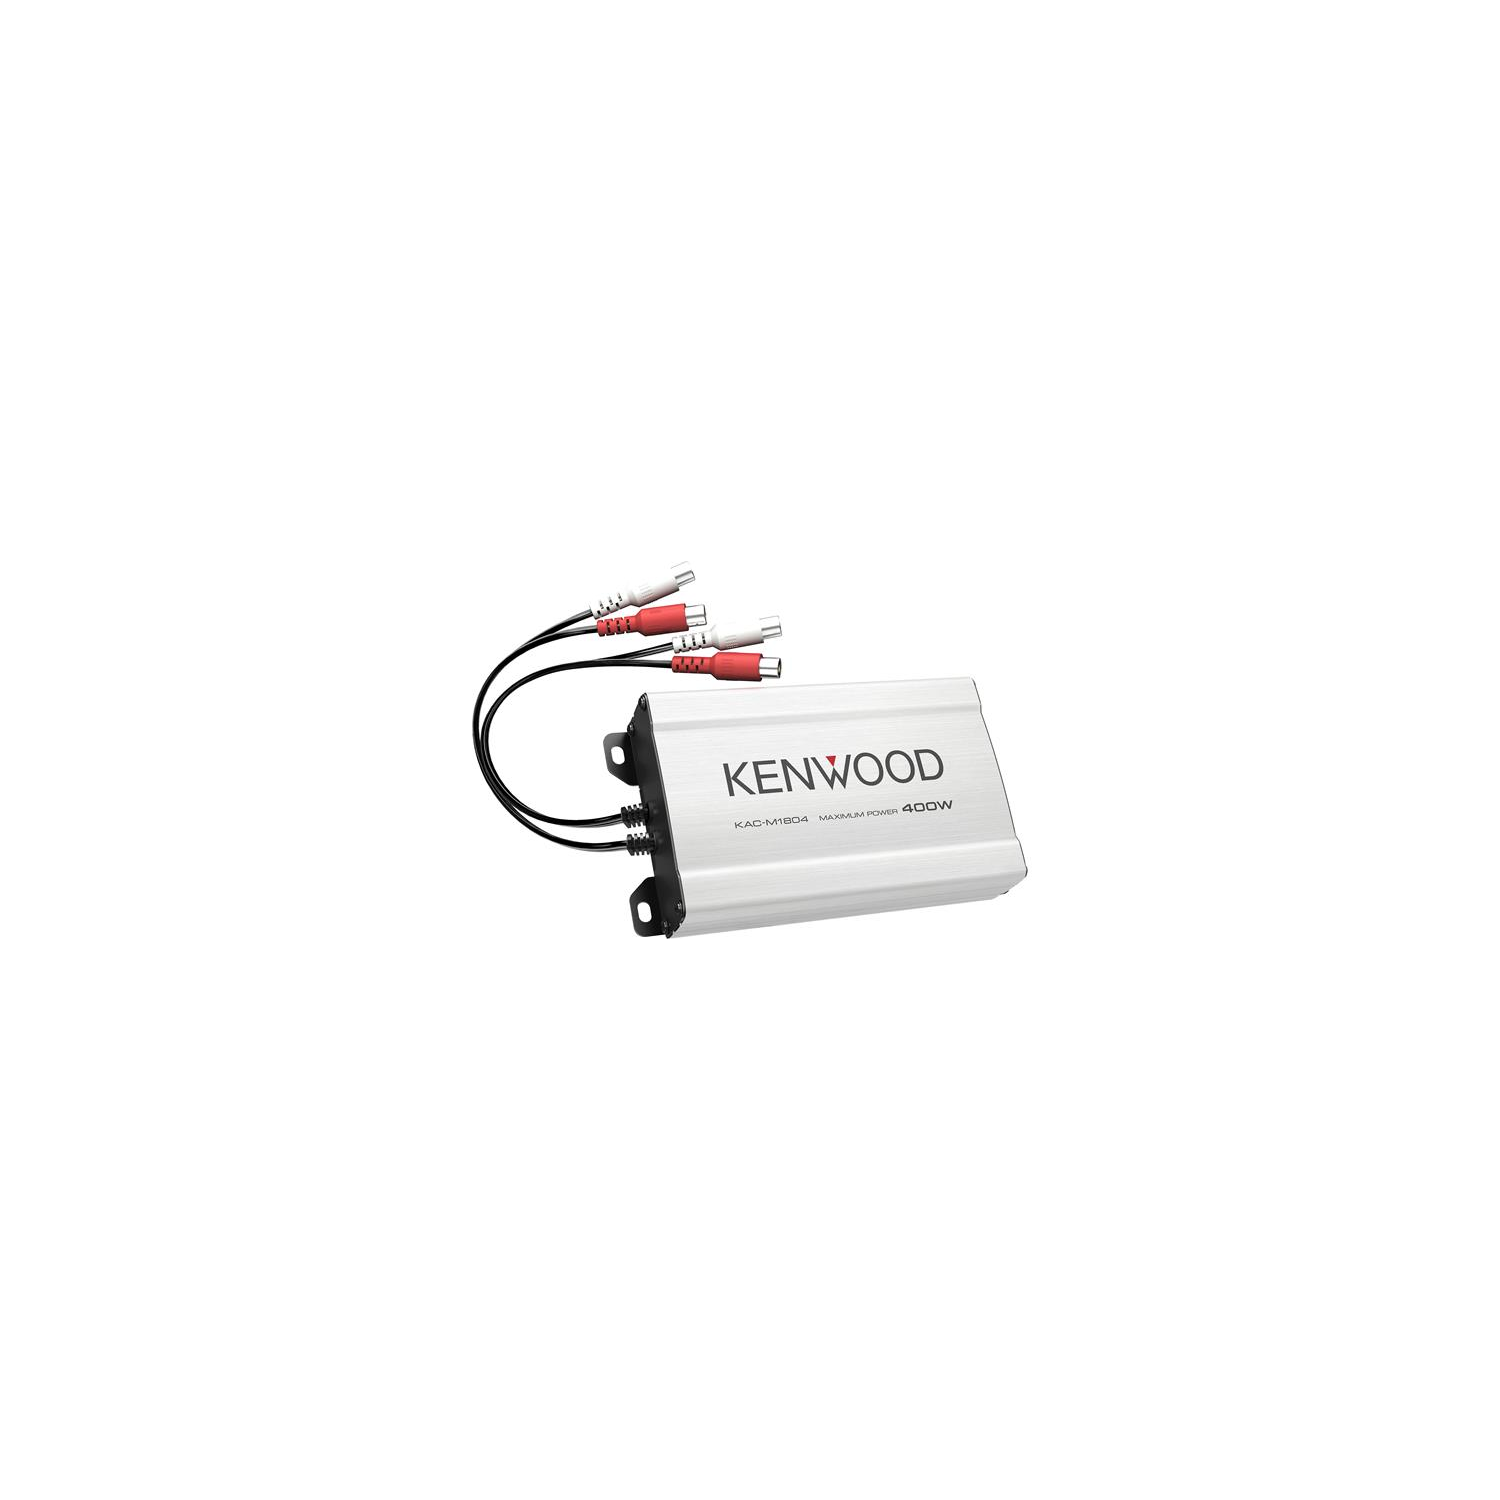 Kenwood KAC-M1804 Compact 4-channel amplifier — 45 watts RMS x 4 at 4 Ohms